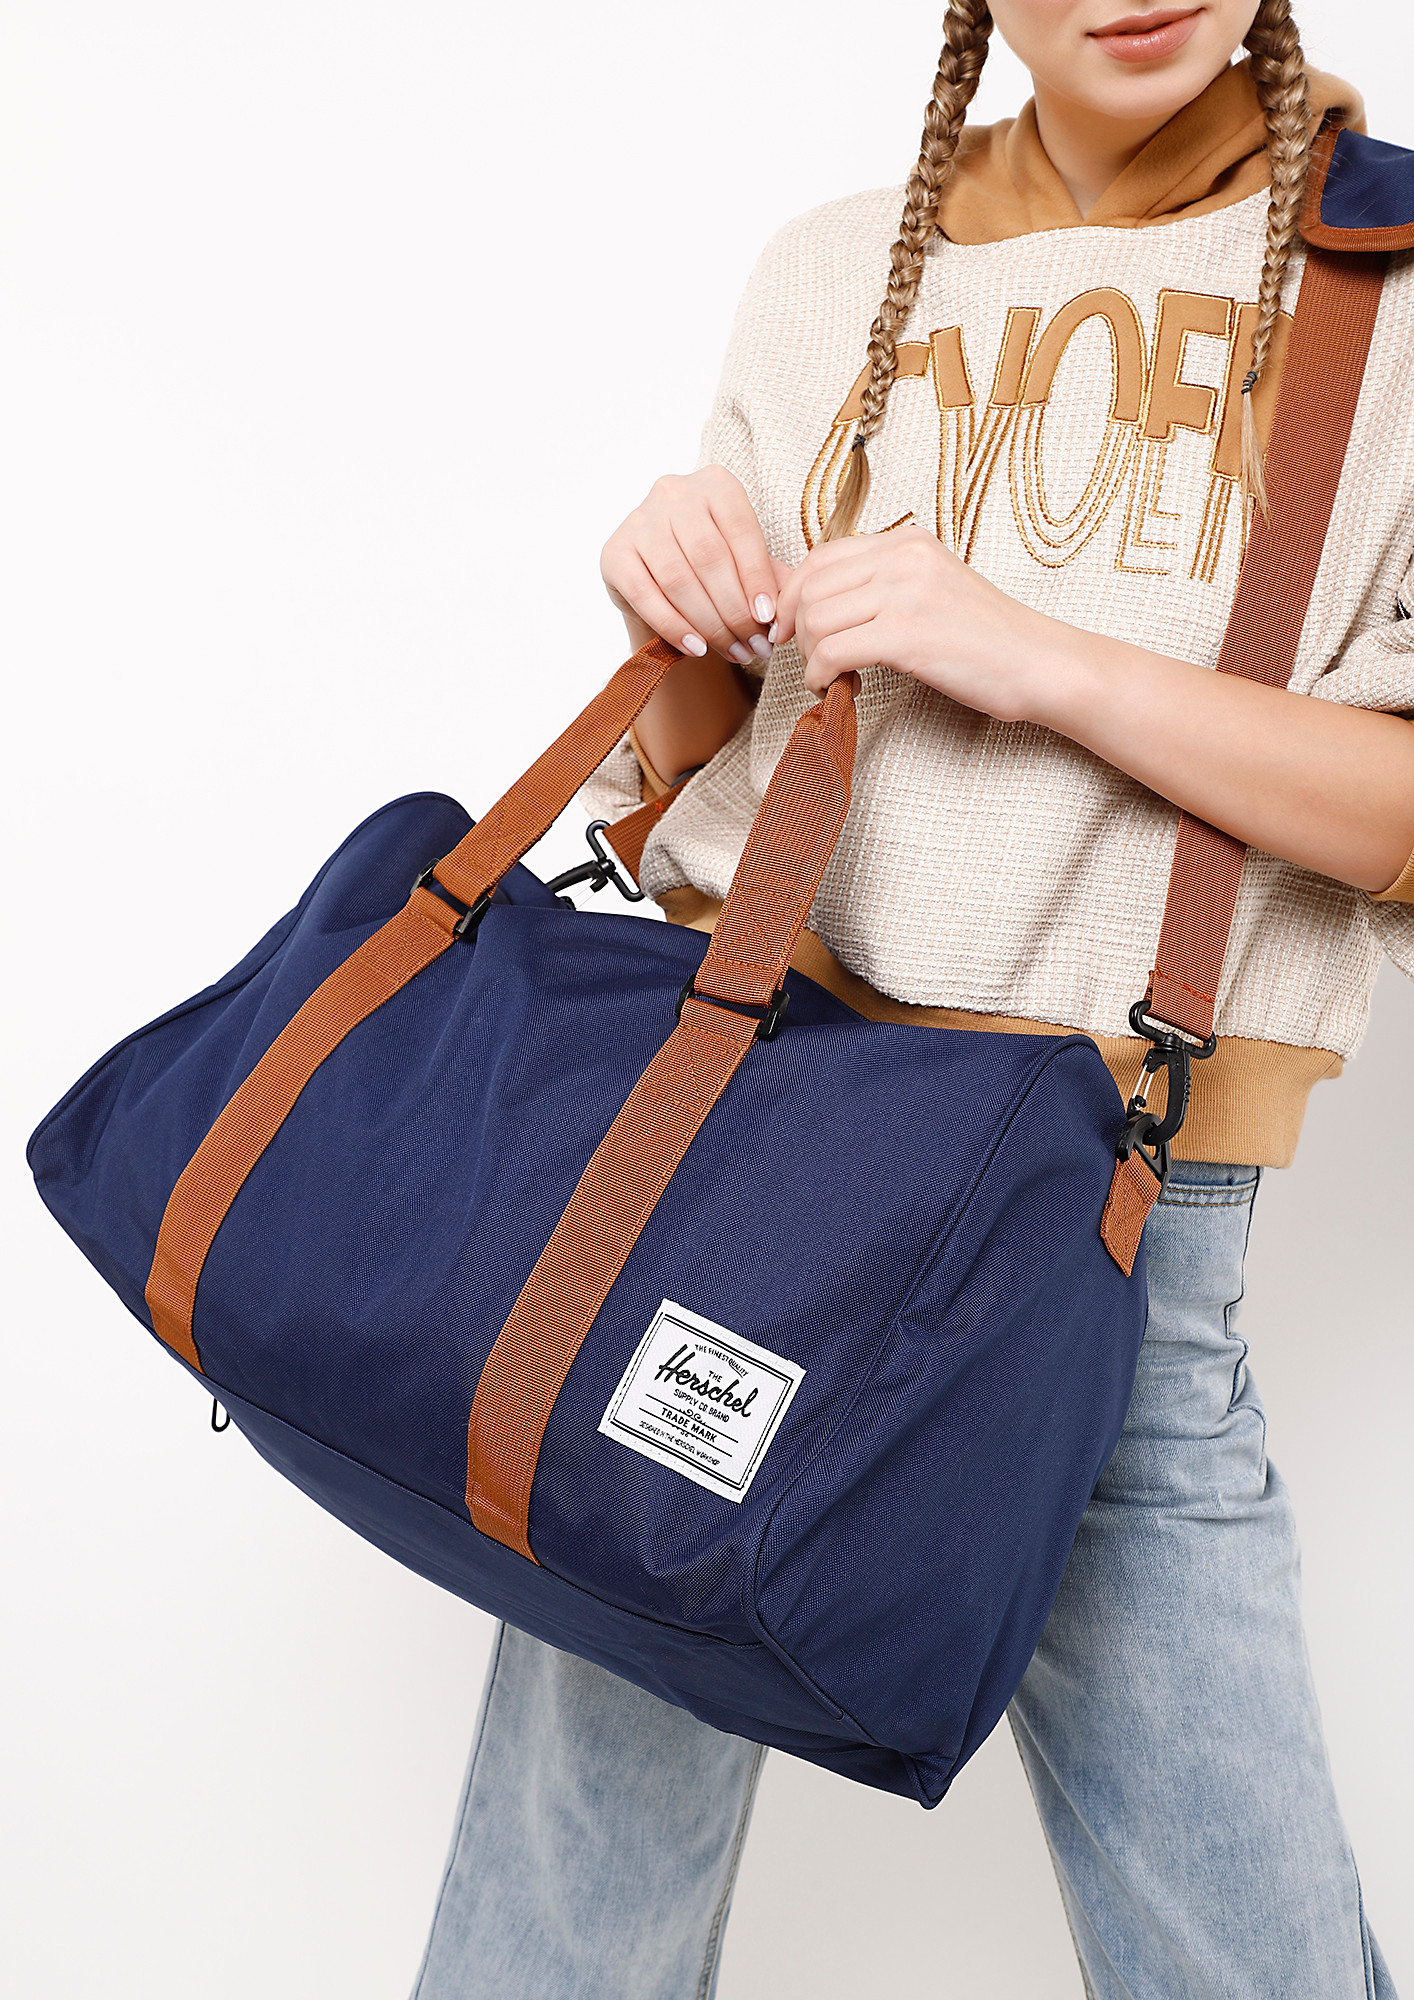 ALL WORKED UP BLUE DUFFLE BAG